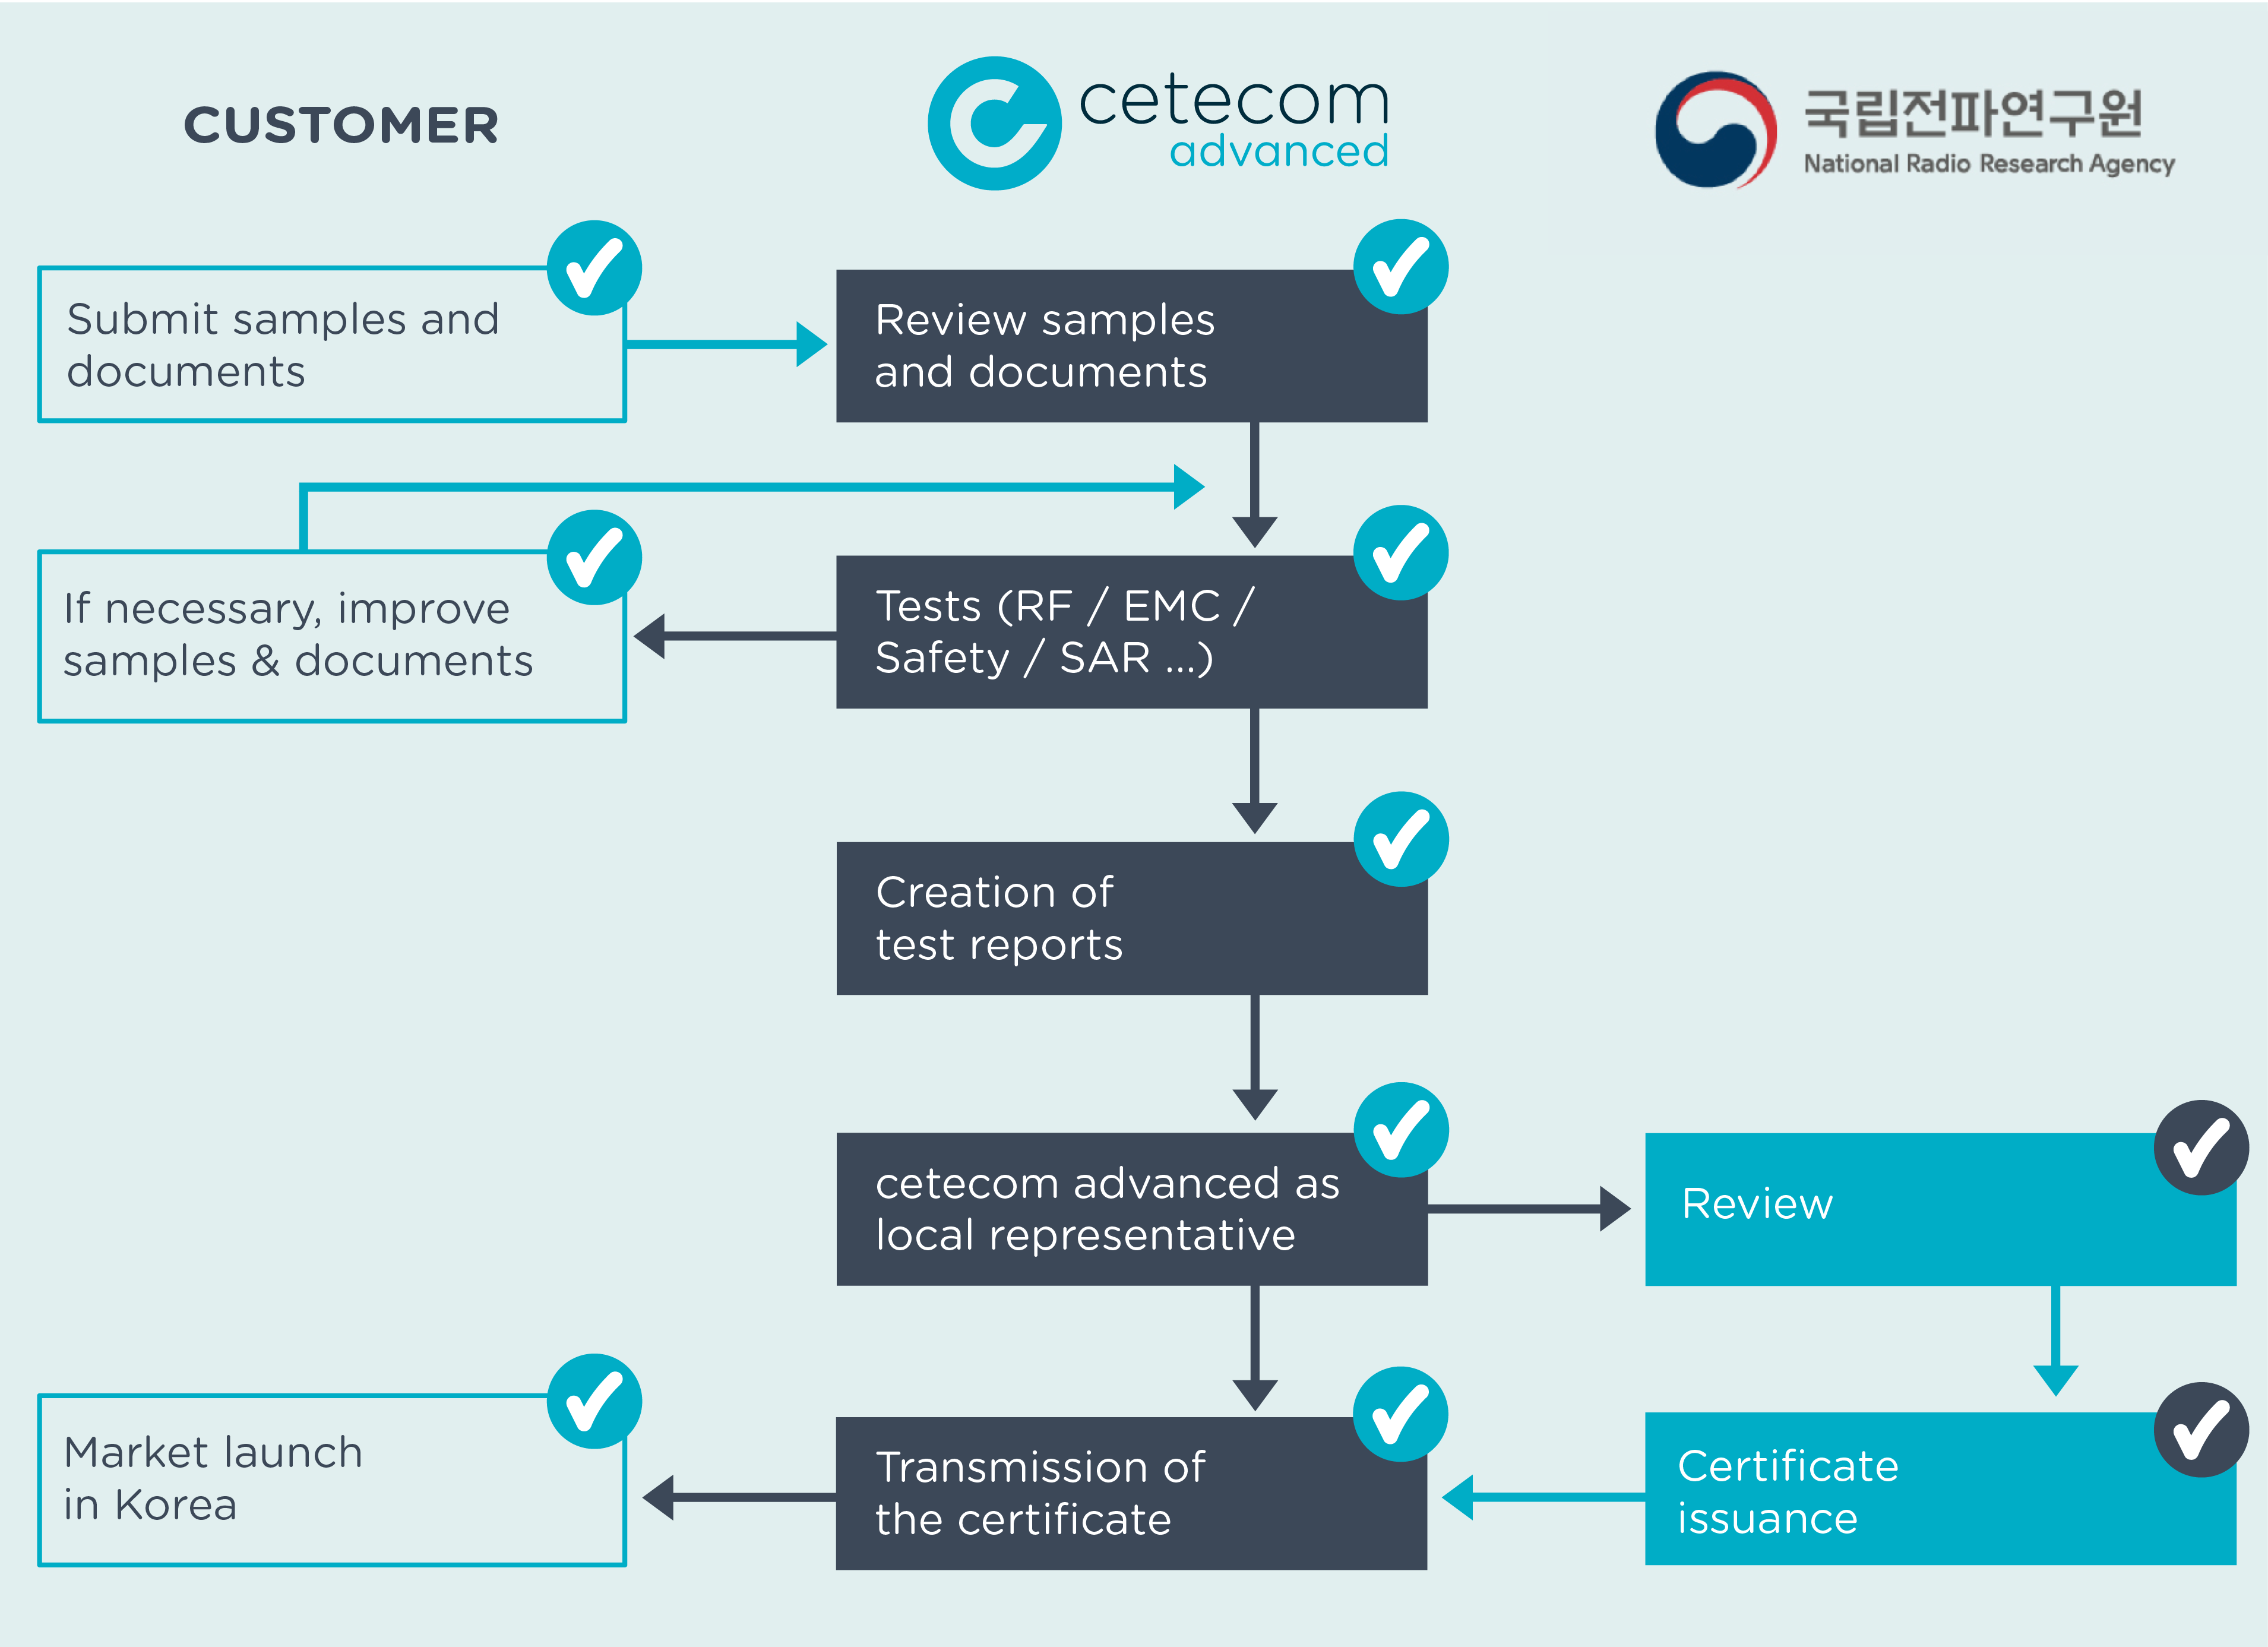 Schematic representation of the approval process for a KC certification with cetecom advanced